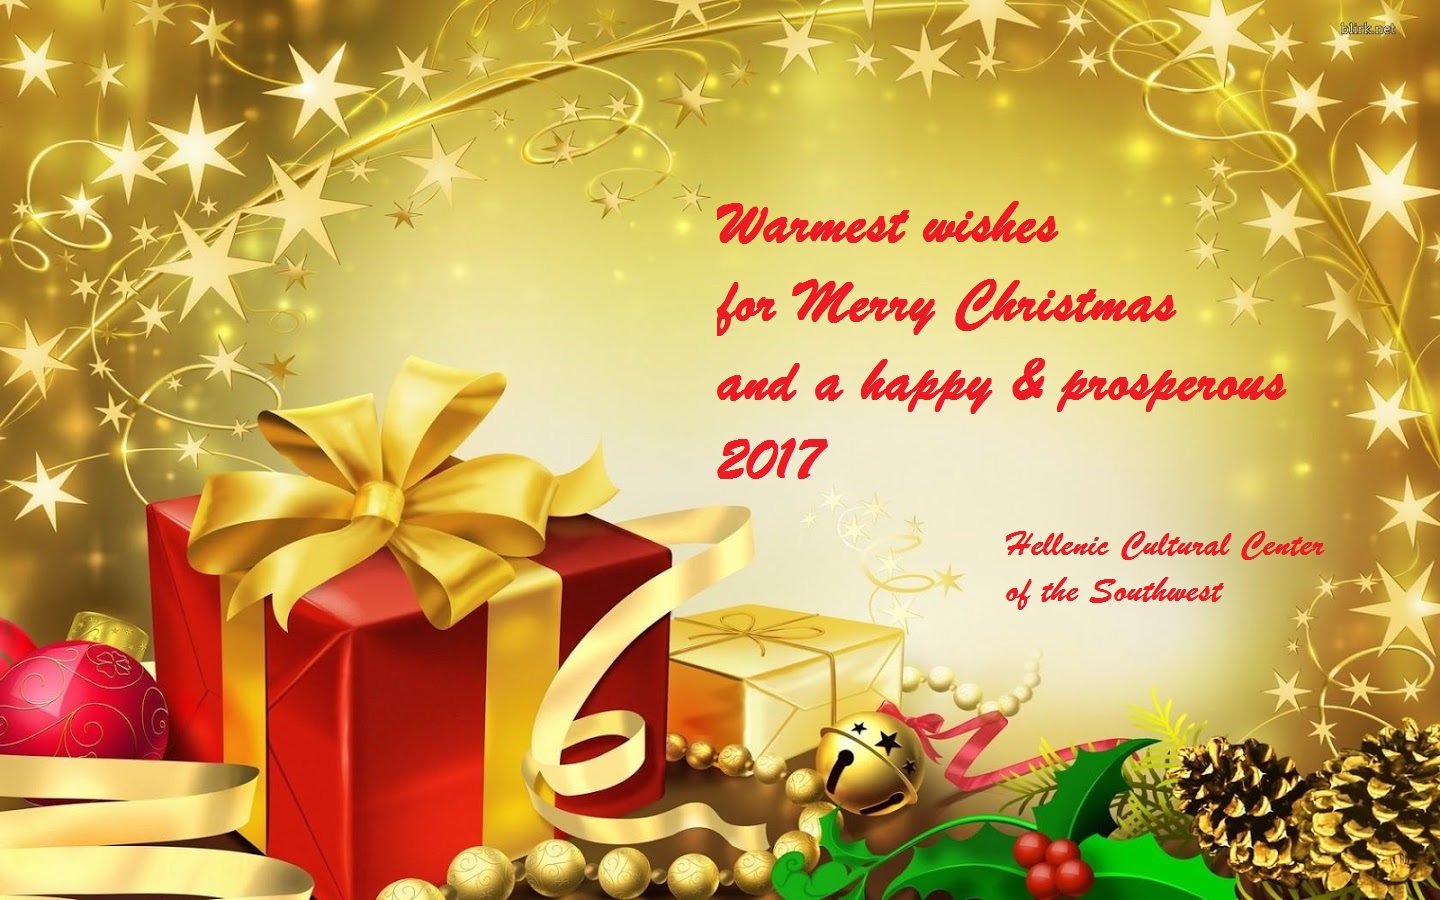 Merry Christmas and a Happy & prosperous 2017